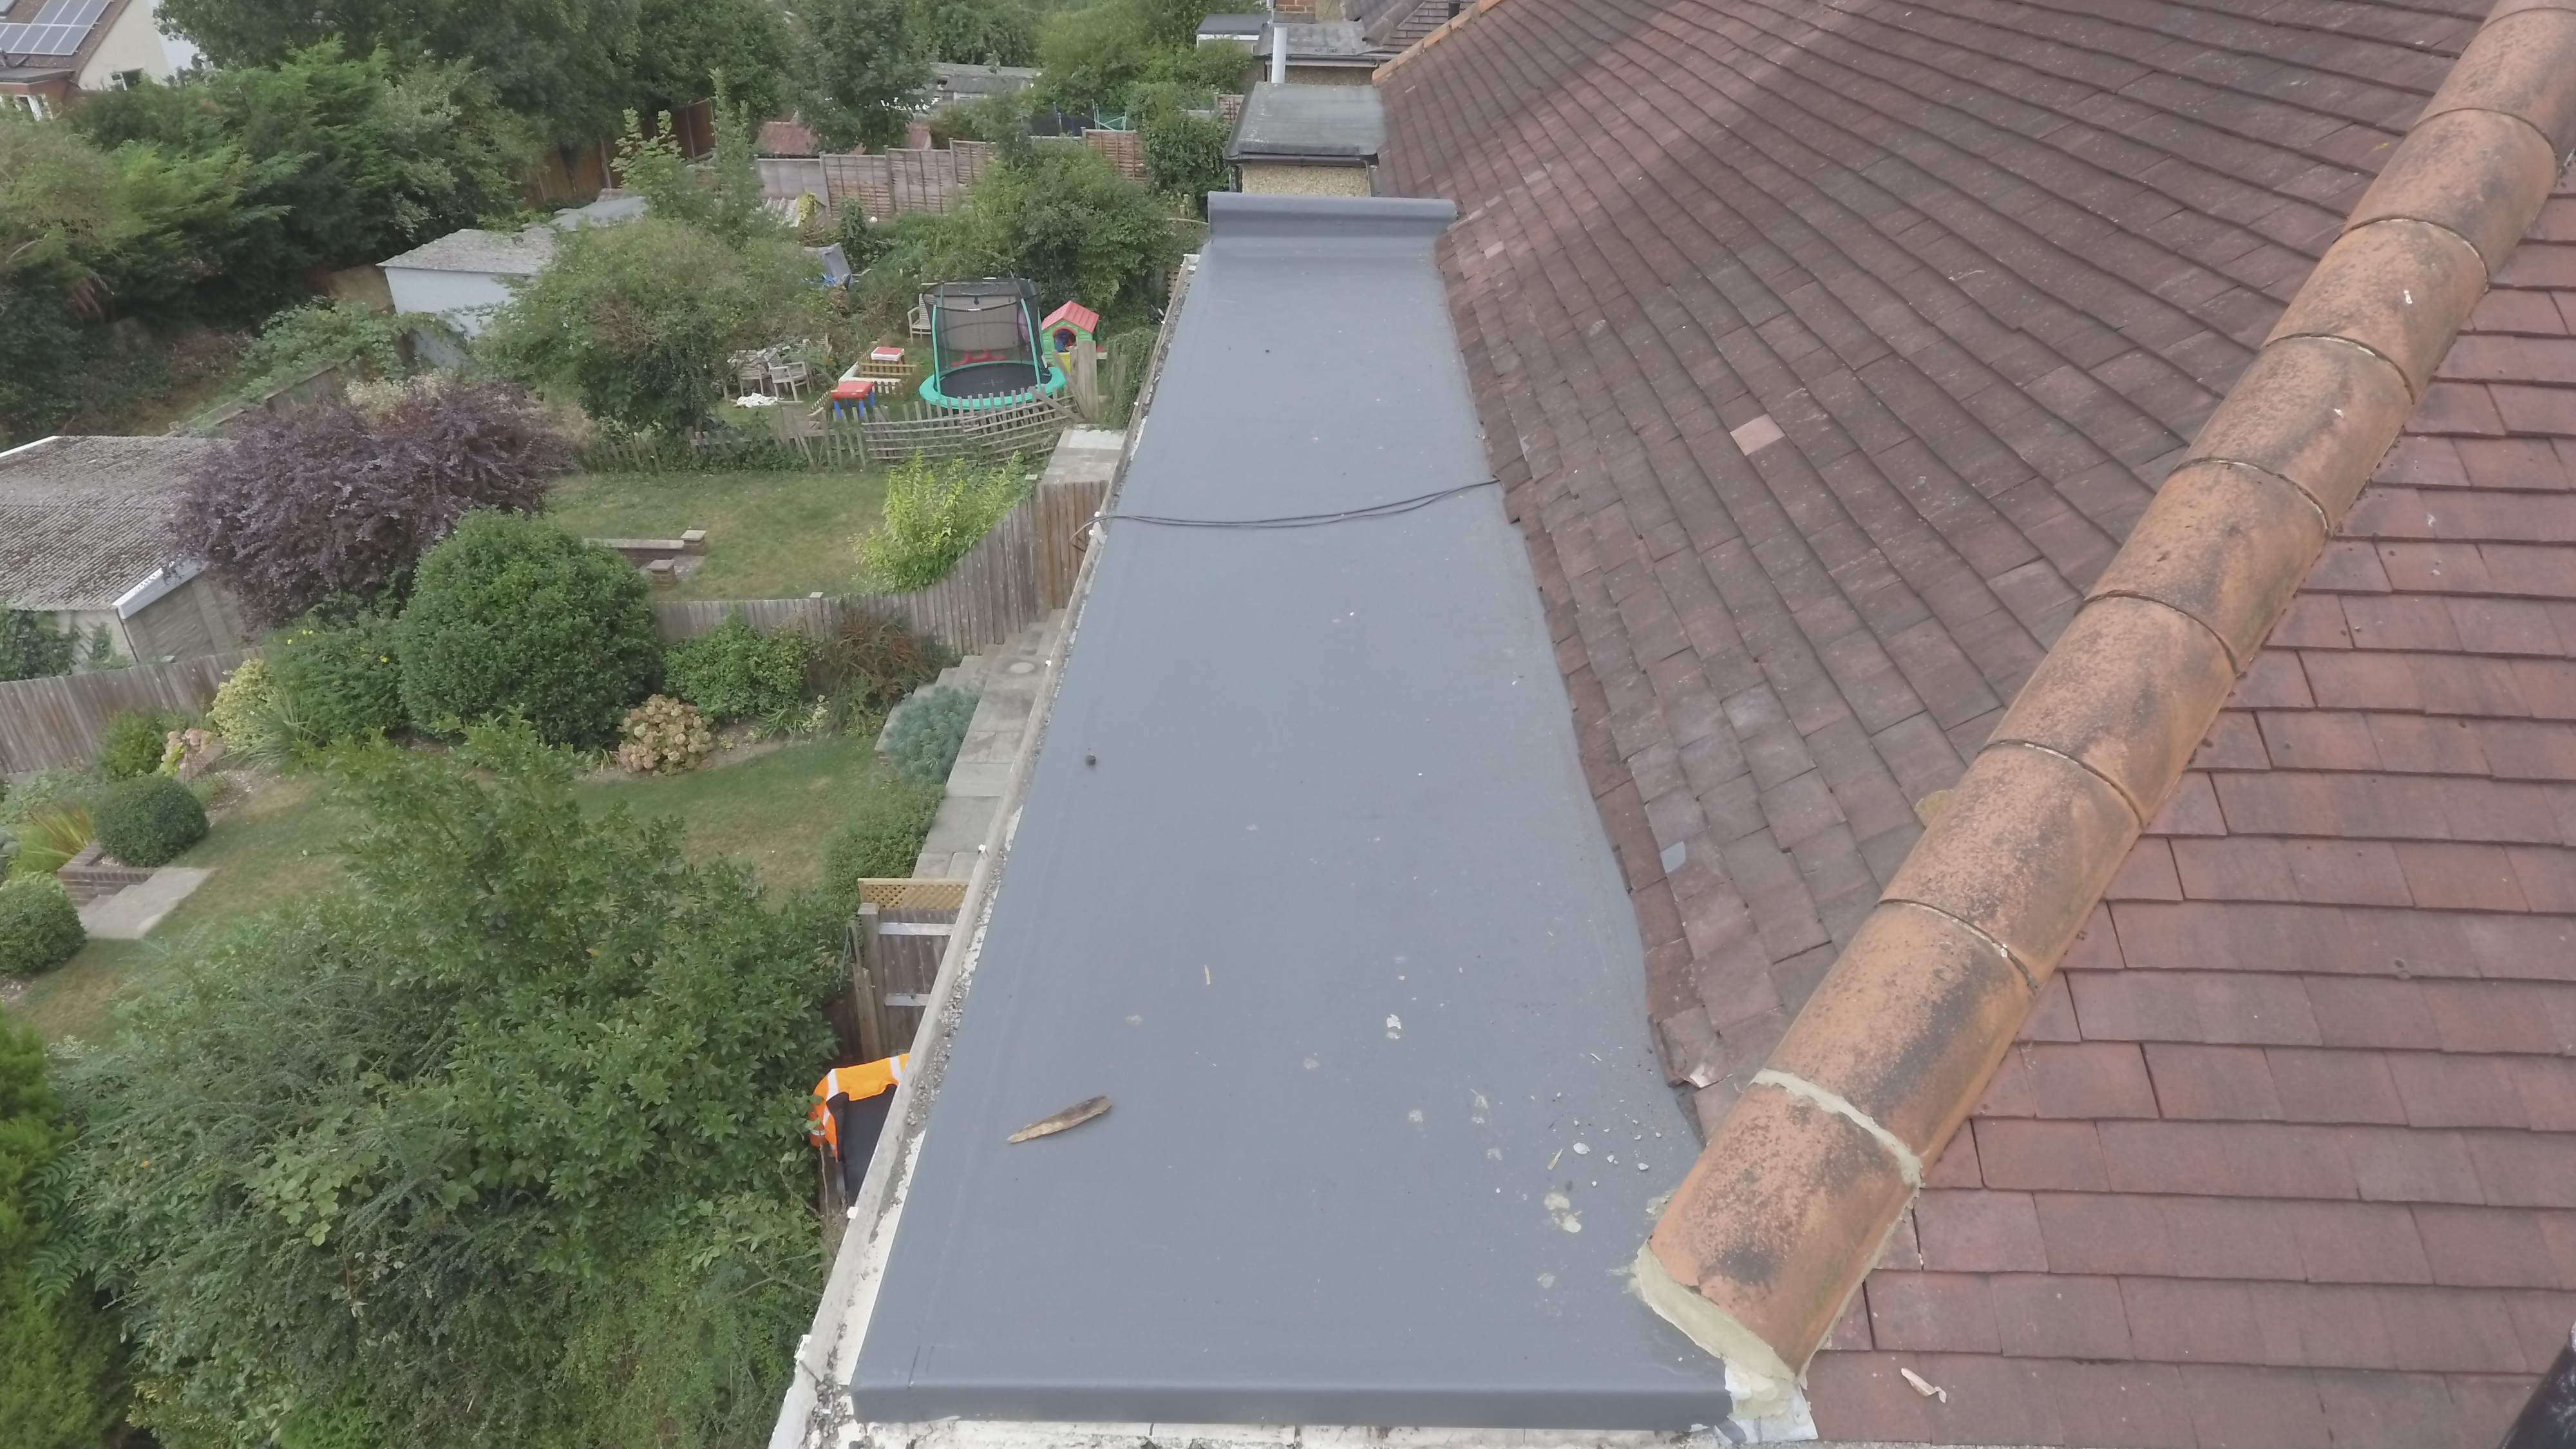 Fibreglass roofing job in Coulsdon